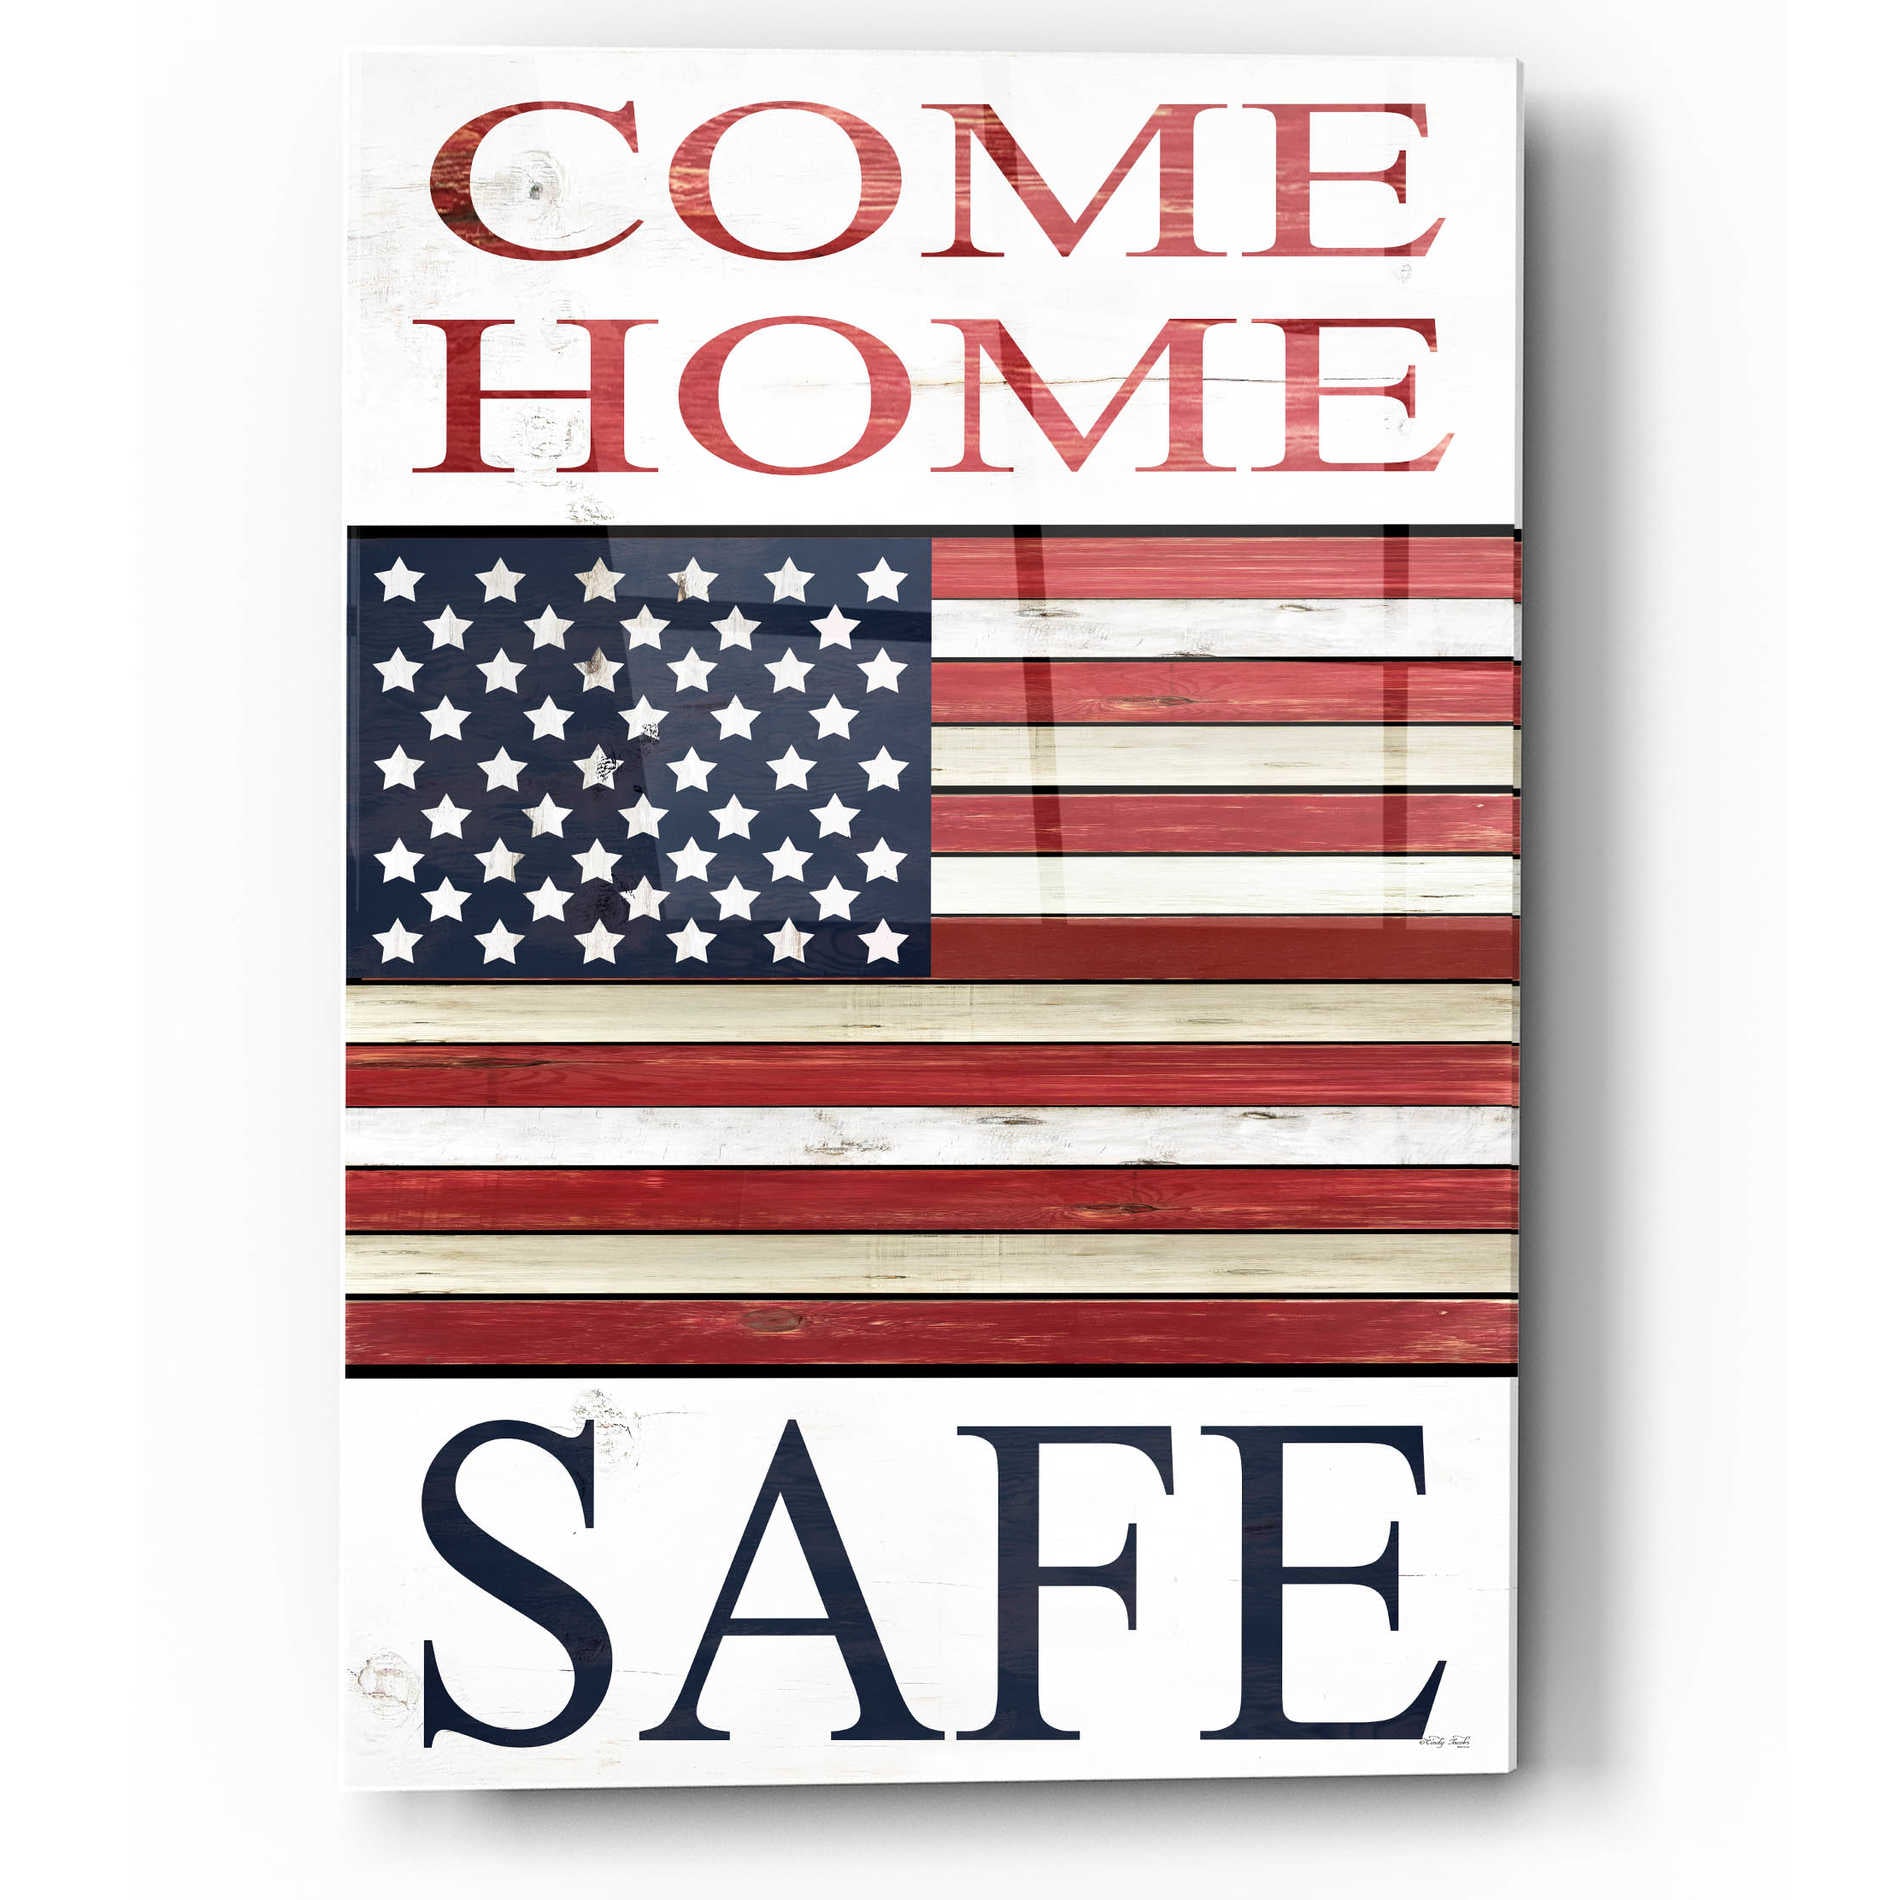 Epic Art 'Come Home Safe Patriot' by Cindy Jacobs, Acrylic Glass Wall Art,12x16